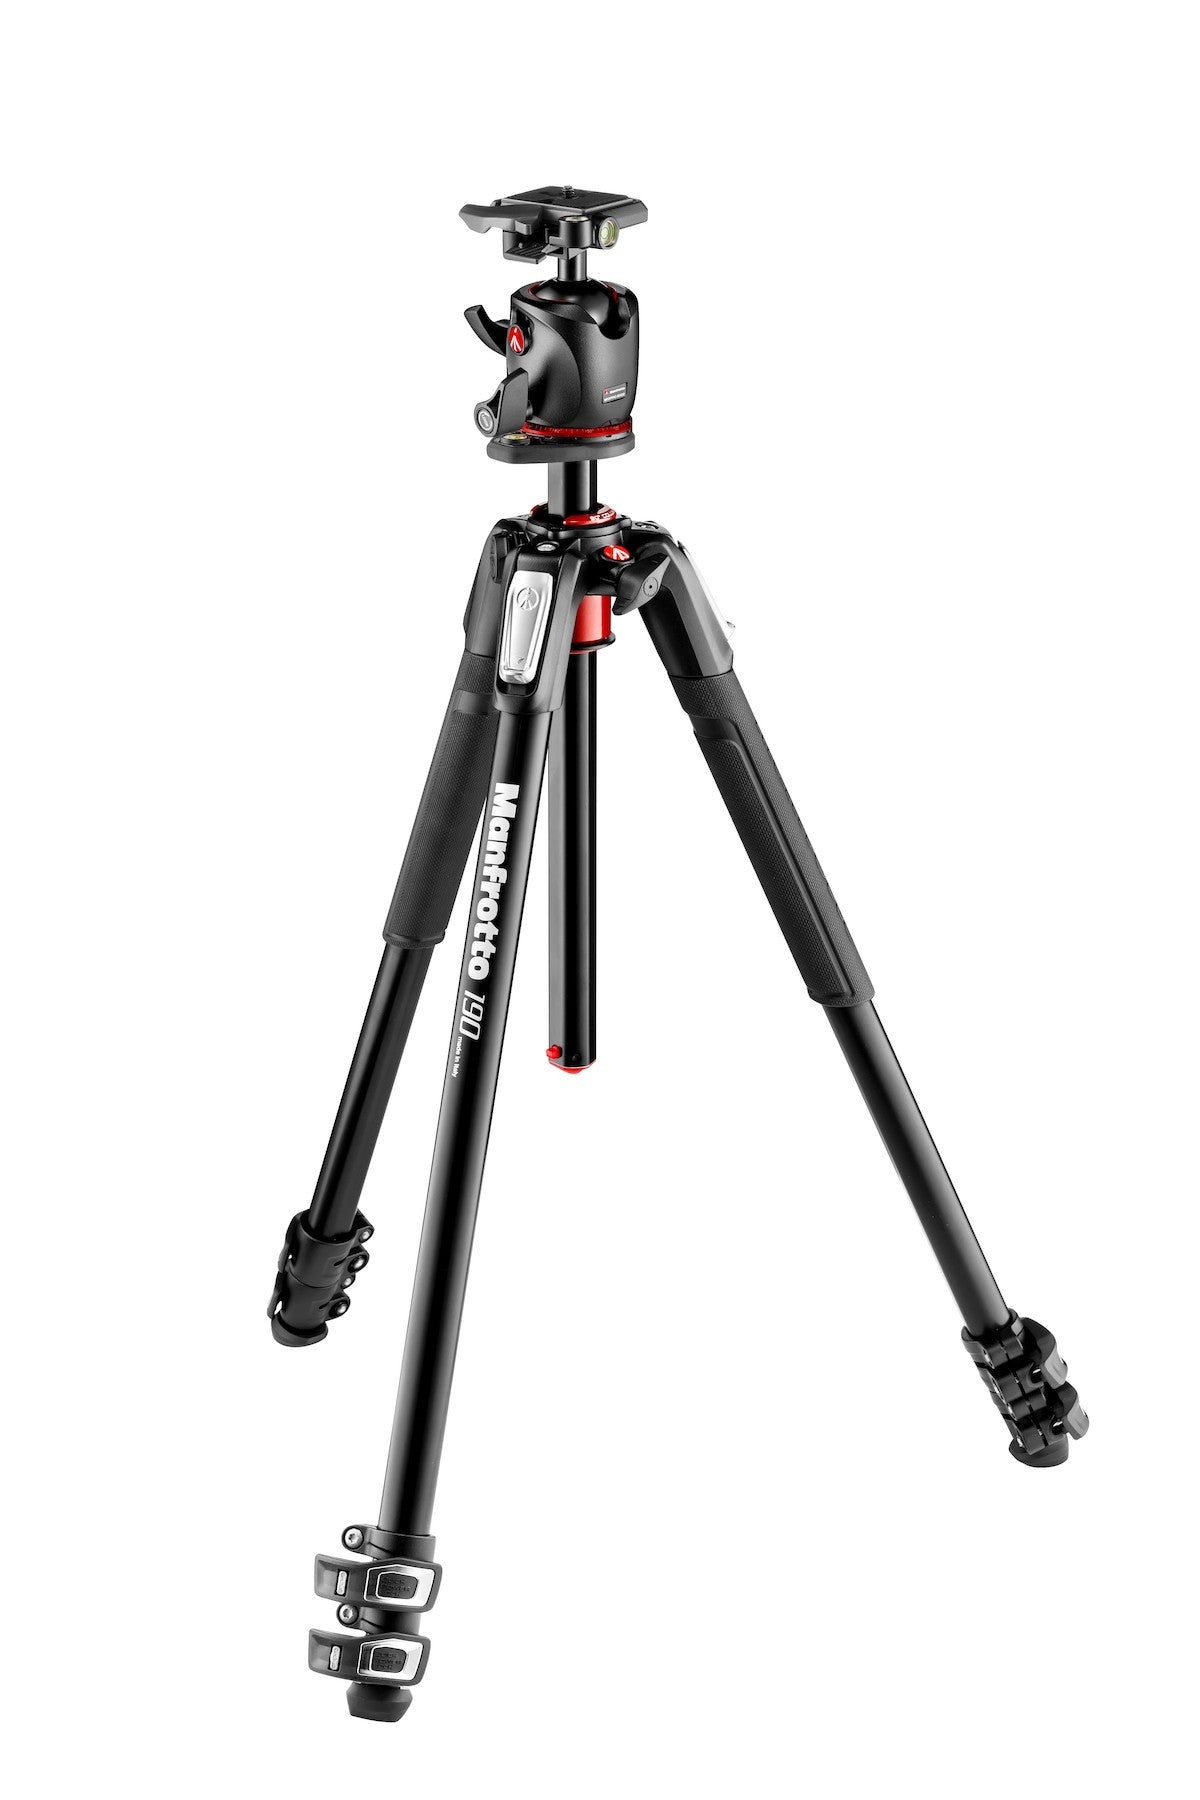 Manfrotto MK190 XPRO3 with MHXPRO-BHQ2 Ball Head, tripods photo tripods, Manfrotto - Pictureline 